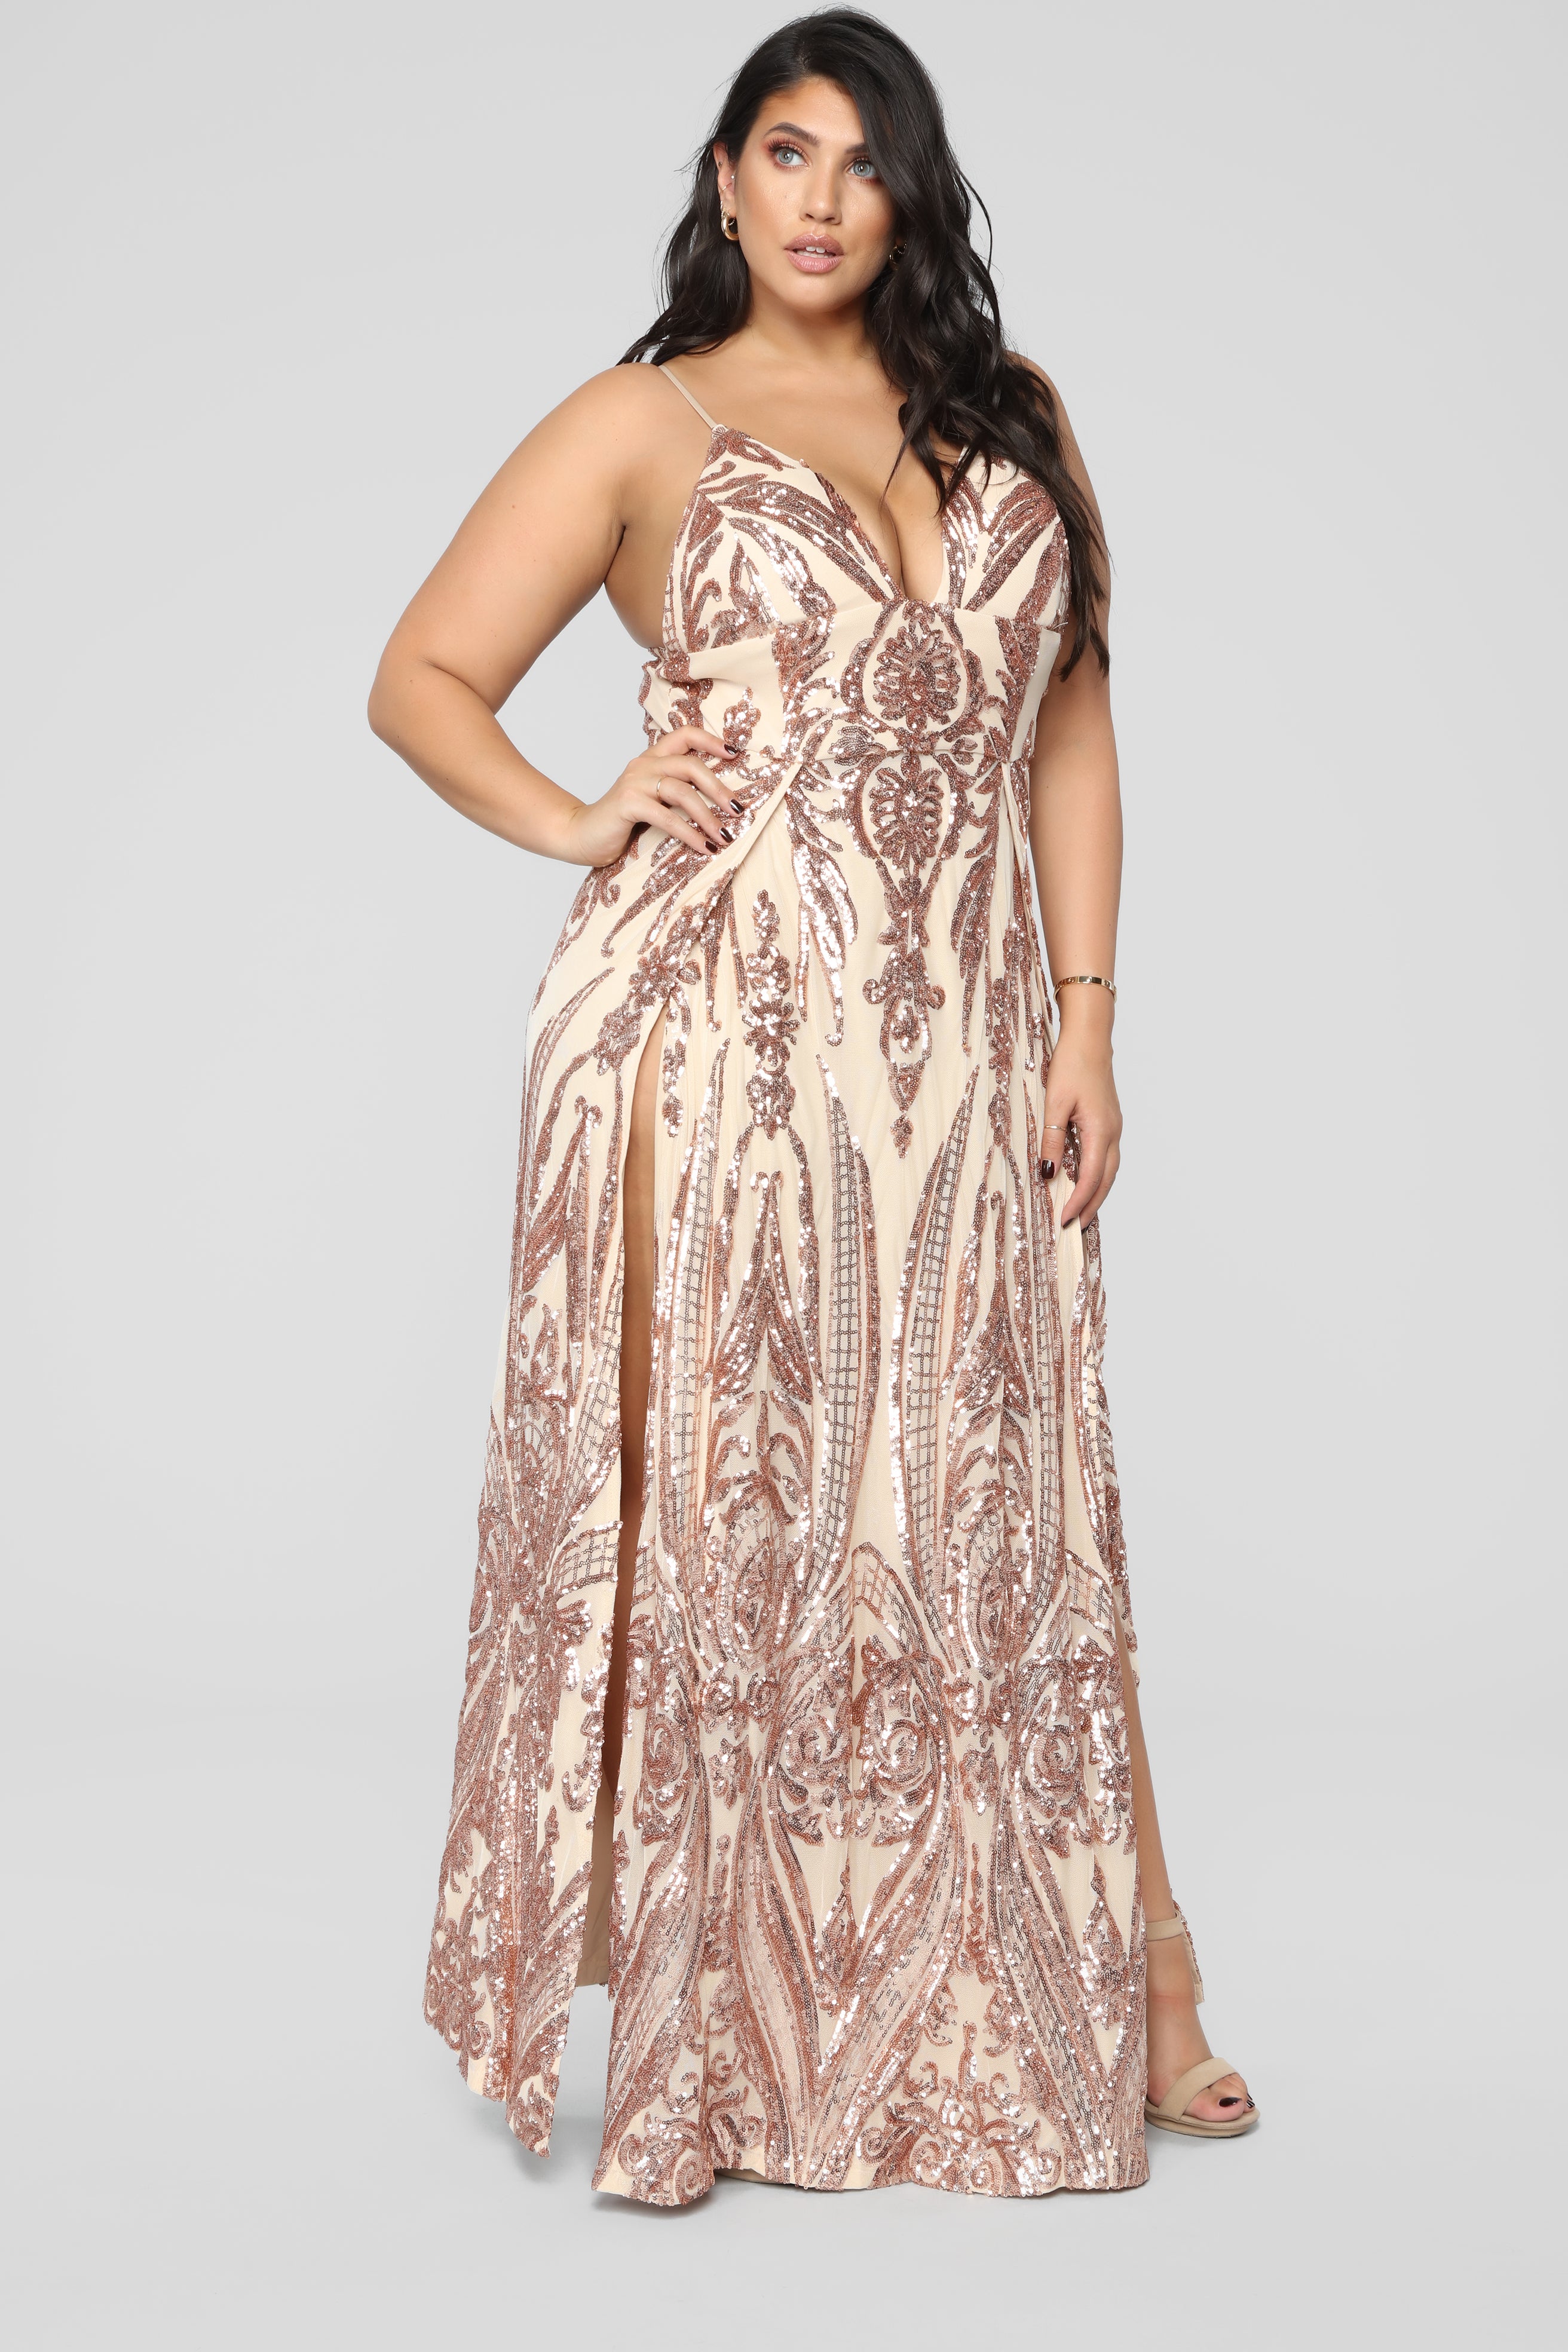 rose gold dress for chubby